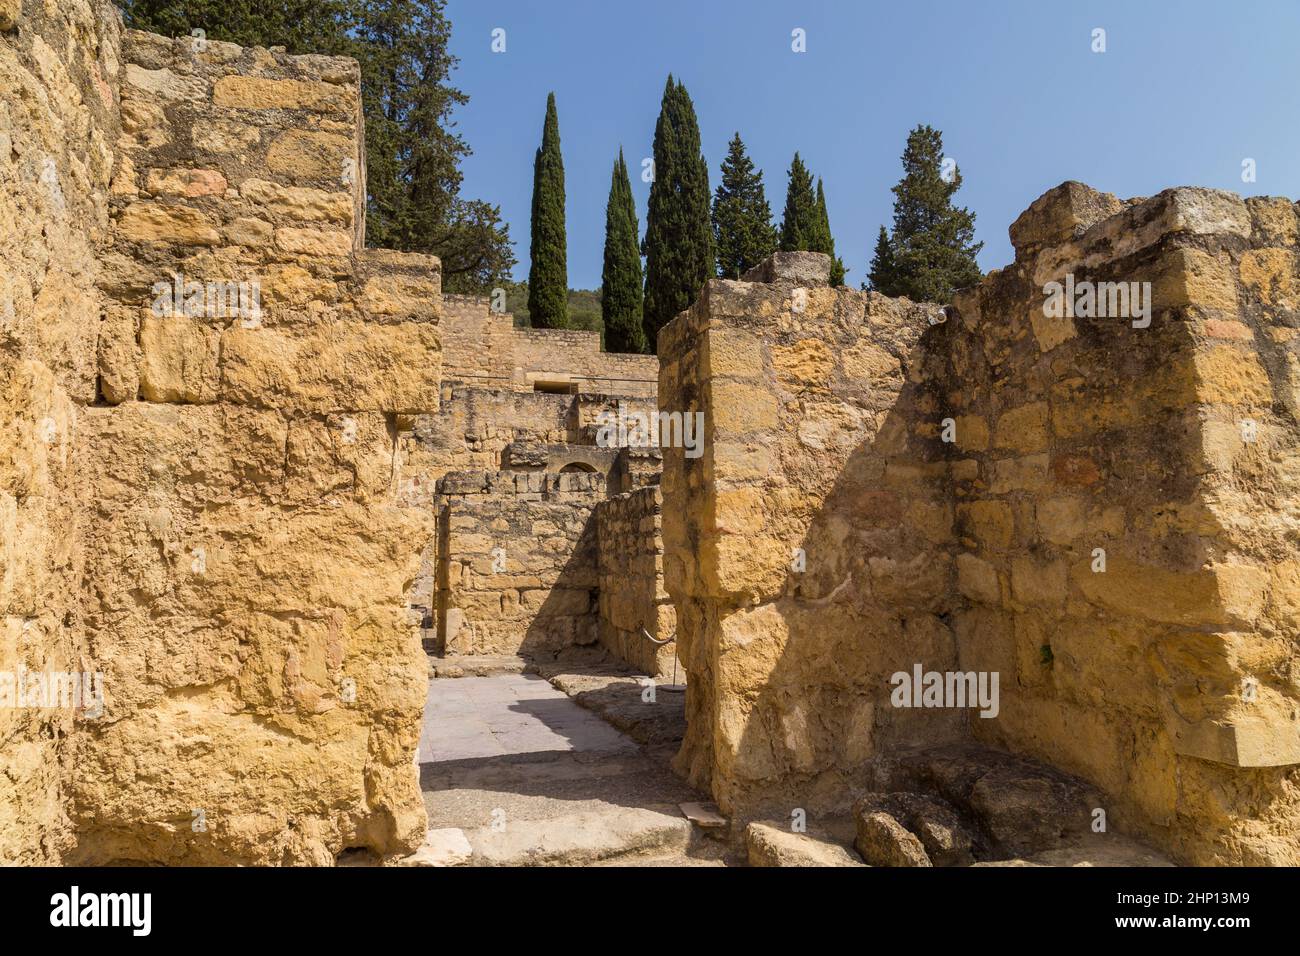 Palace of Medina Azahara, arab city founded in the year 936 by Abderraman III about 8 km from Cordoba, Andalusia, Spain Stock Photo